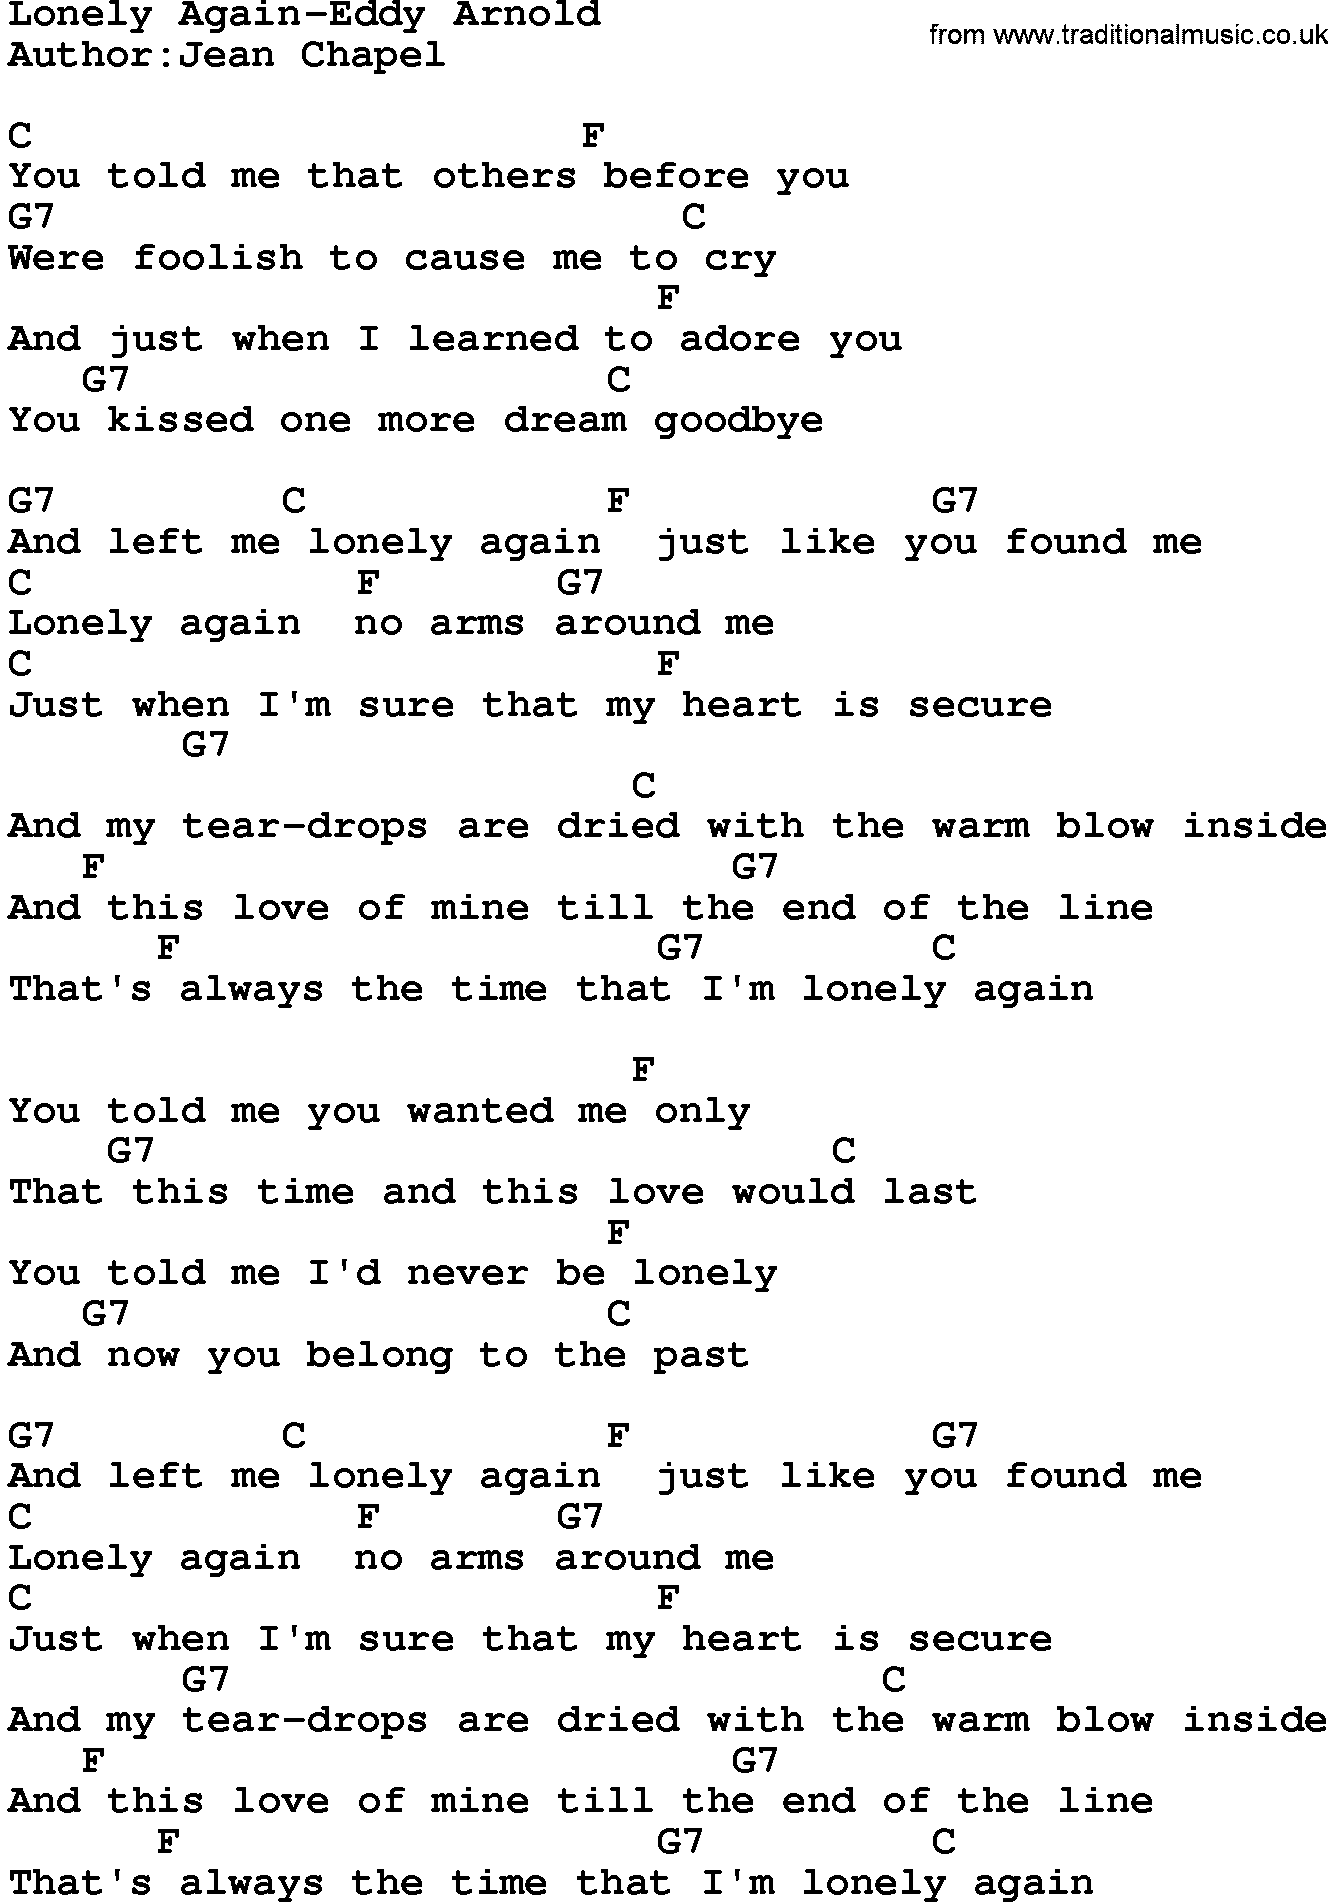 Country music song: Lonely Again-Eddy Arnold lyrics and chords